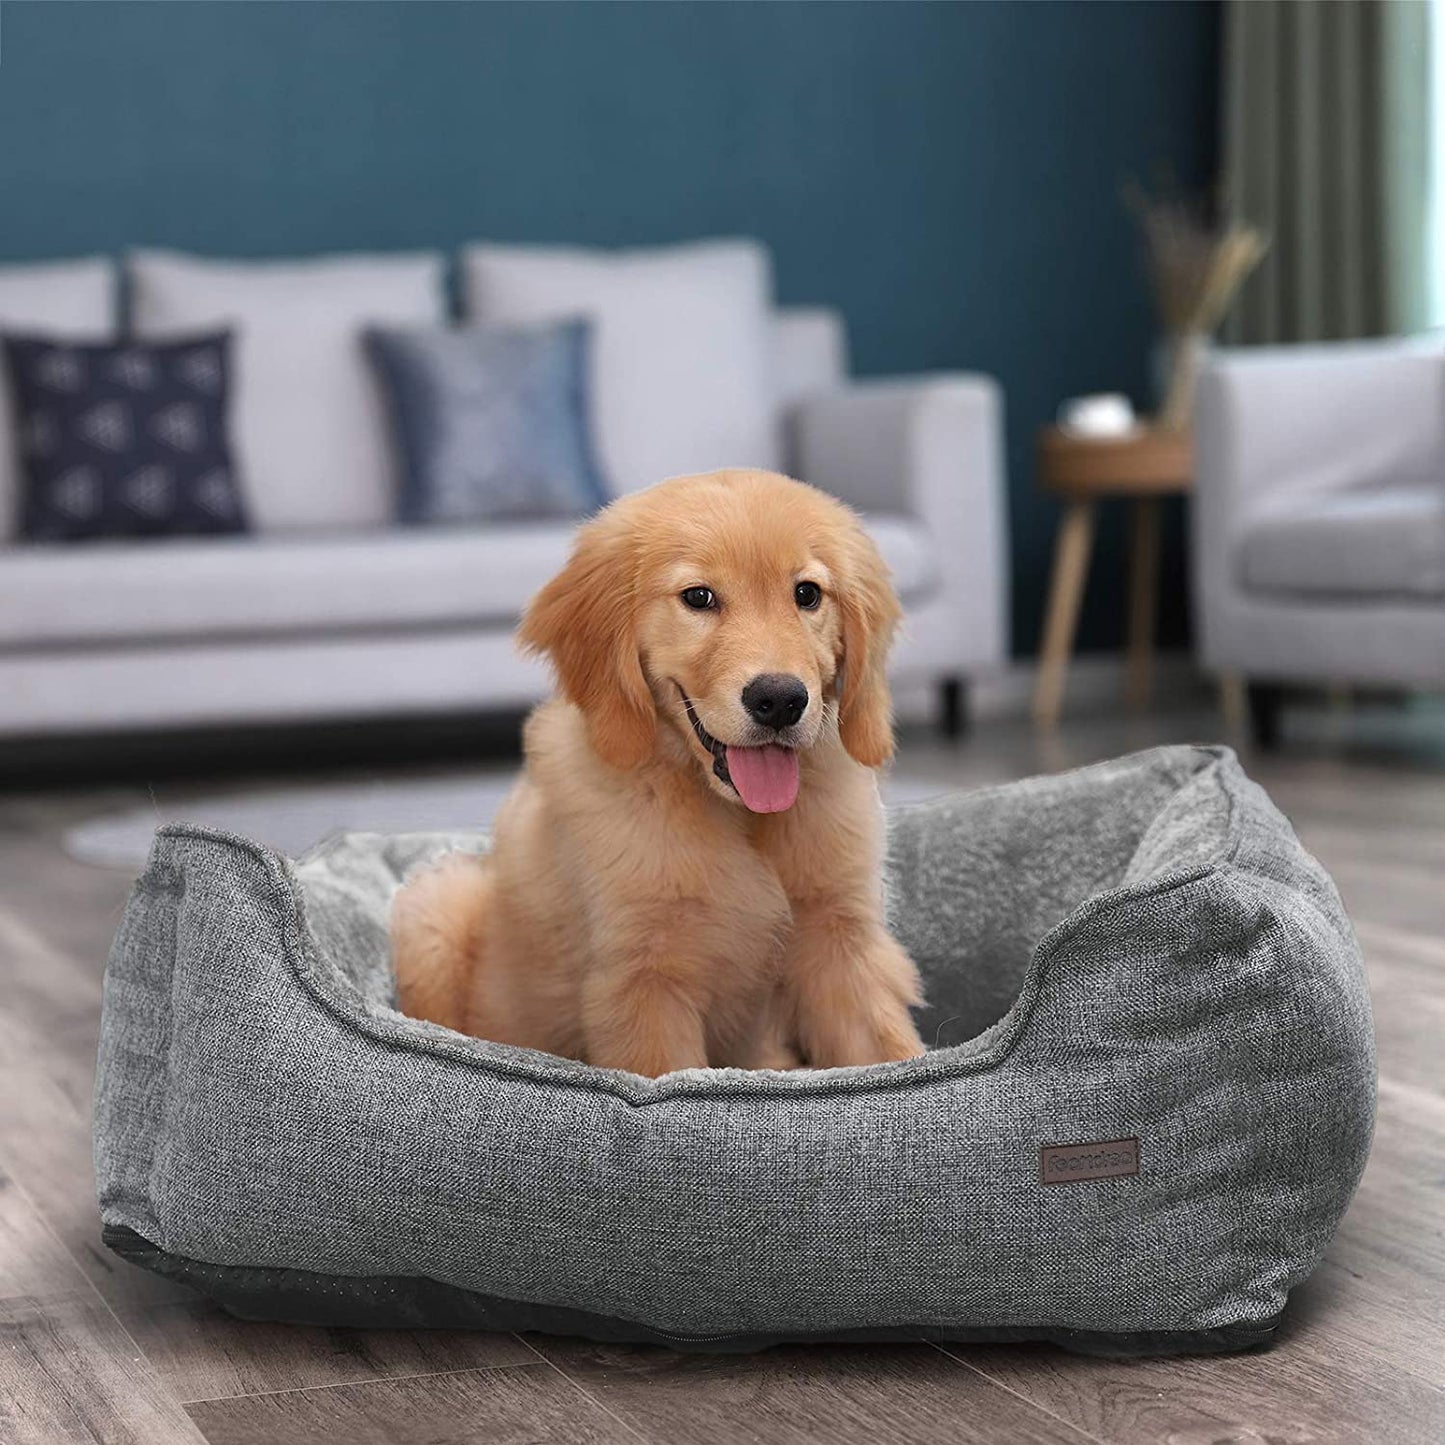 Nancy's Deluxe Dog Bed Washable - Dog Bed - Removable Cover - Dog Beds - 70 x 55 x 21 cm